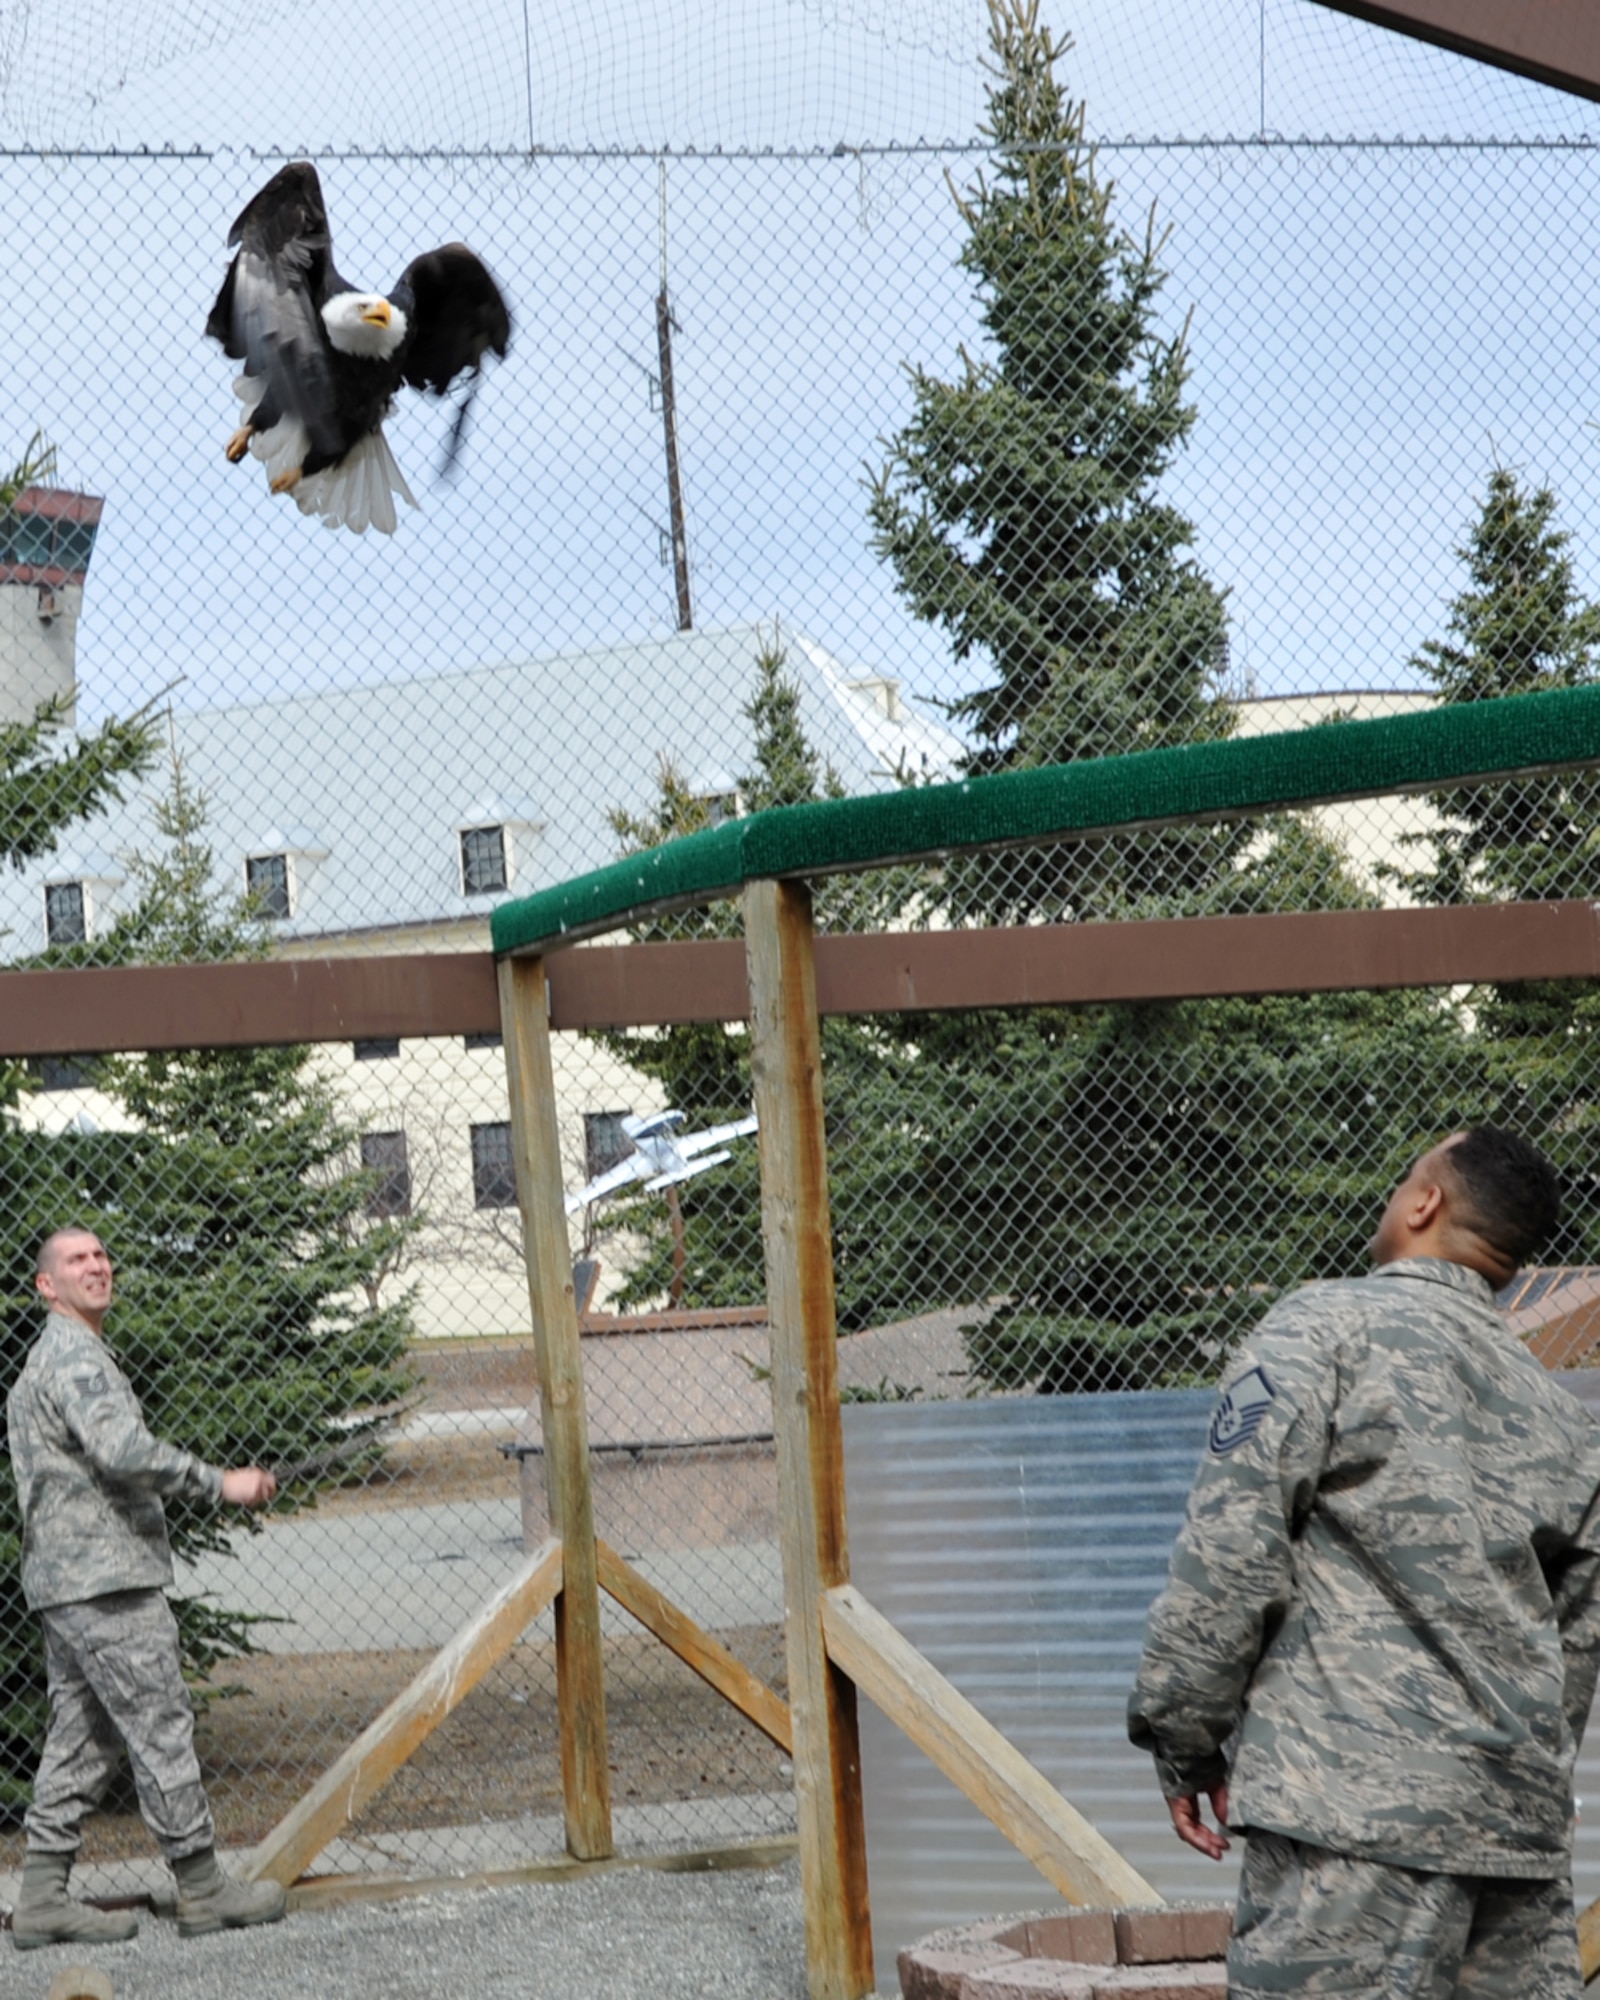 130511-F-IY975-009: JOINT BASE ELMENDORF-RICHARDSON, Alaska -- Notch Wing, one of the two Bald Eagles that reside in the Joint Base Elmendorf-Richardson eagle cage, flies from perch to perch inside the cage May 11 as Tech. Sgt. Timothy Ayers, 3rd Munitions Squadron, and Master Sgt. Vic Rounds, 381st Intelligence Squadron, prepare to capture him in order to clean the cage. The two are part of a group of volunteers who maintains the cage and care for the eagles, which have been injured and are not able to survive in the wild. (U.S. Air Force photo/Senior Airman Blake Mize)